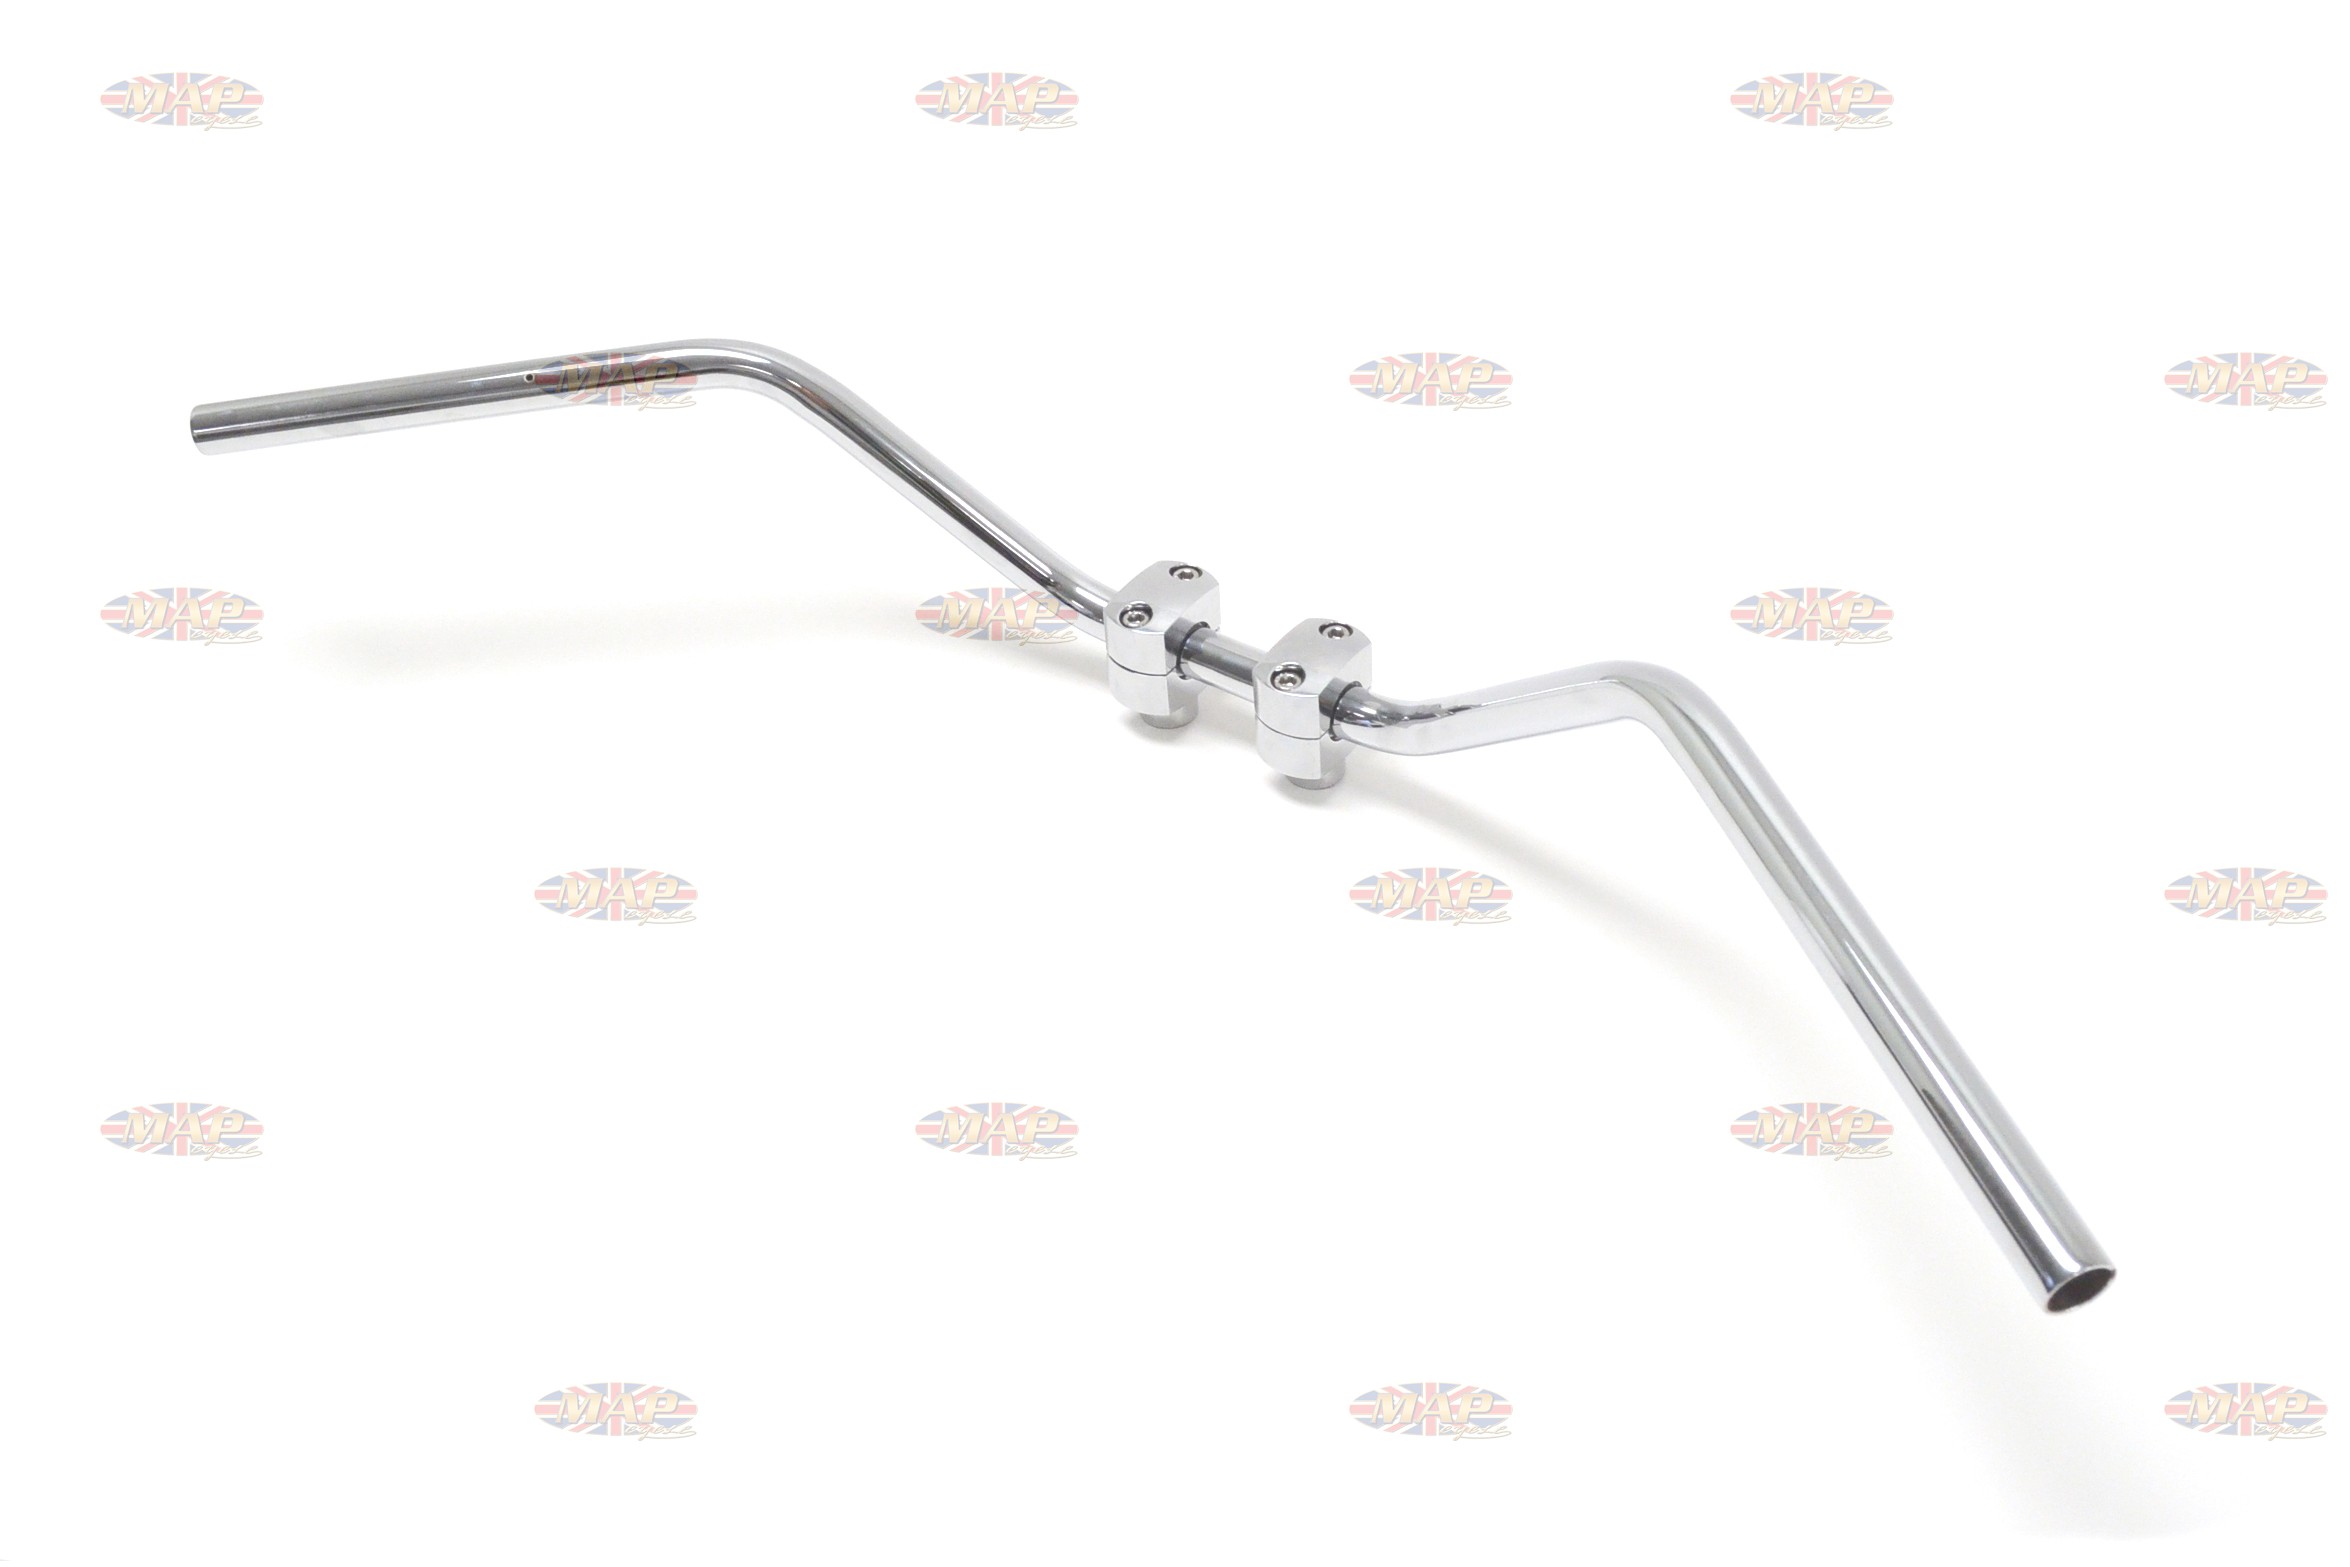 Triumph T120 TR6 Knurled and Drilled Handlebar 97-1870/E